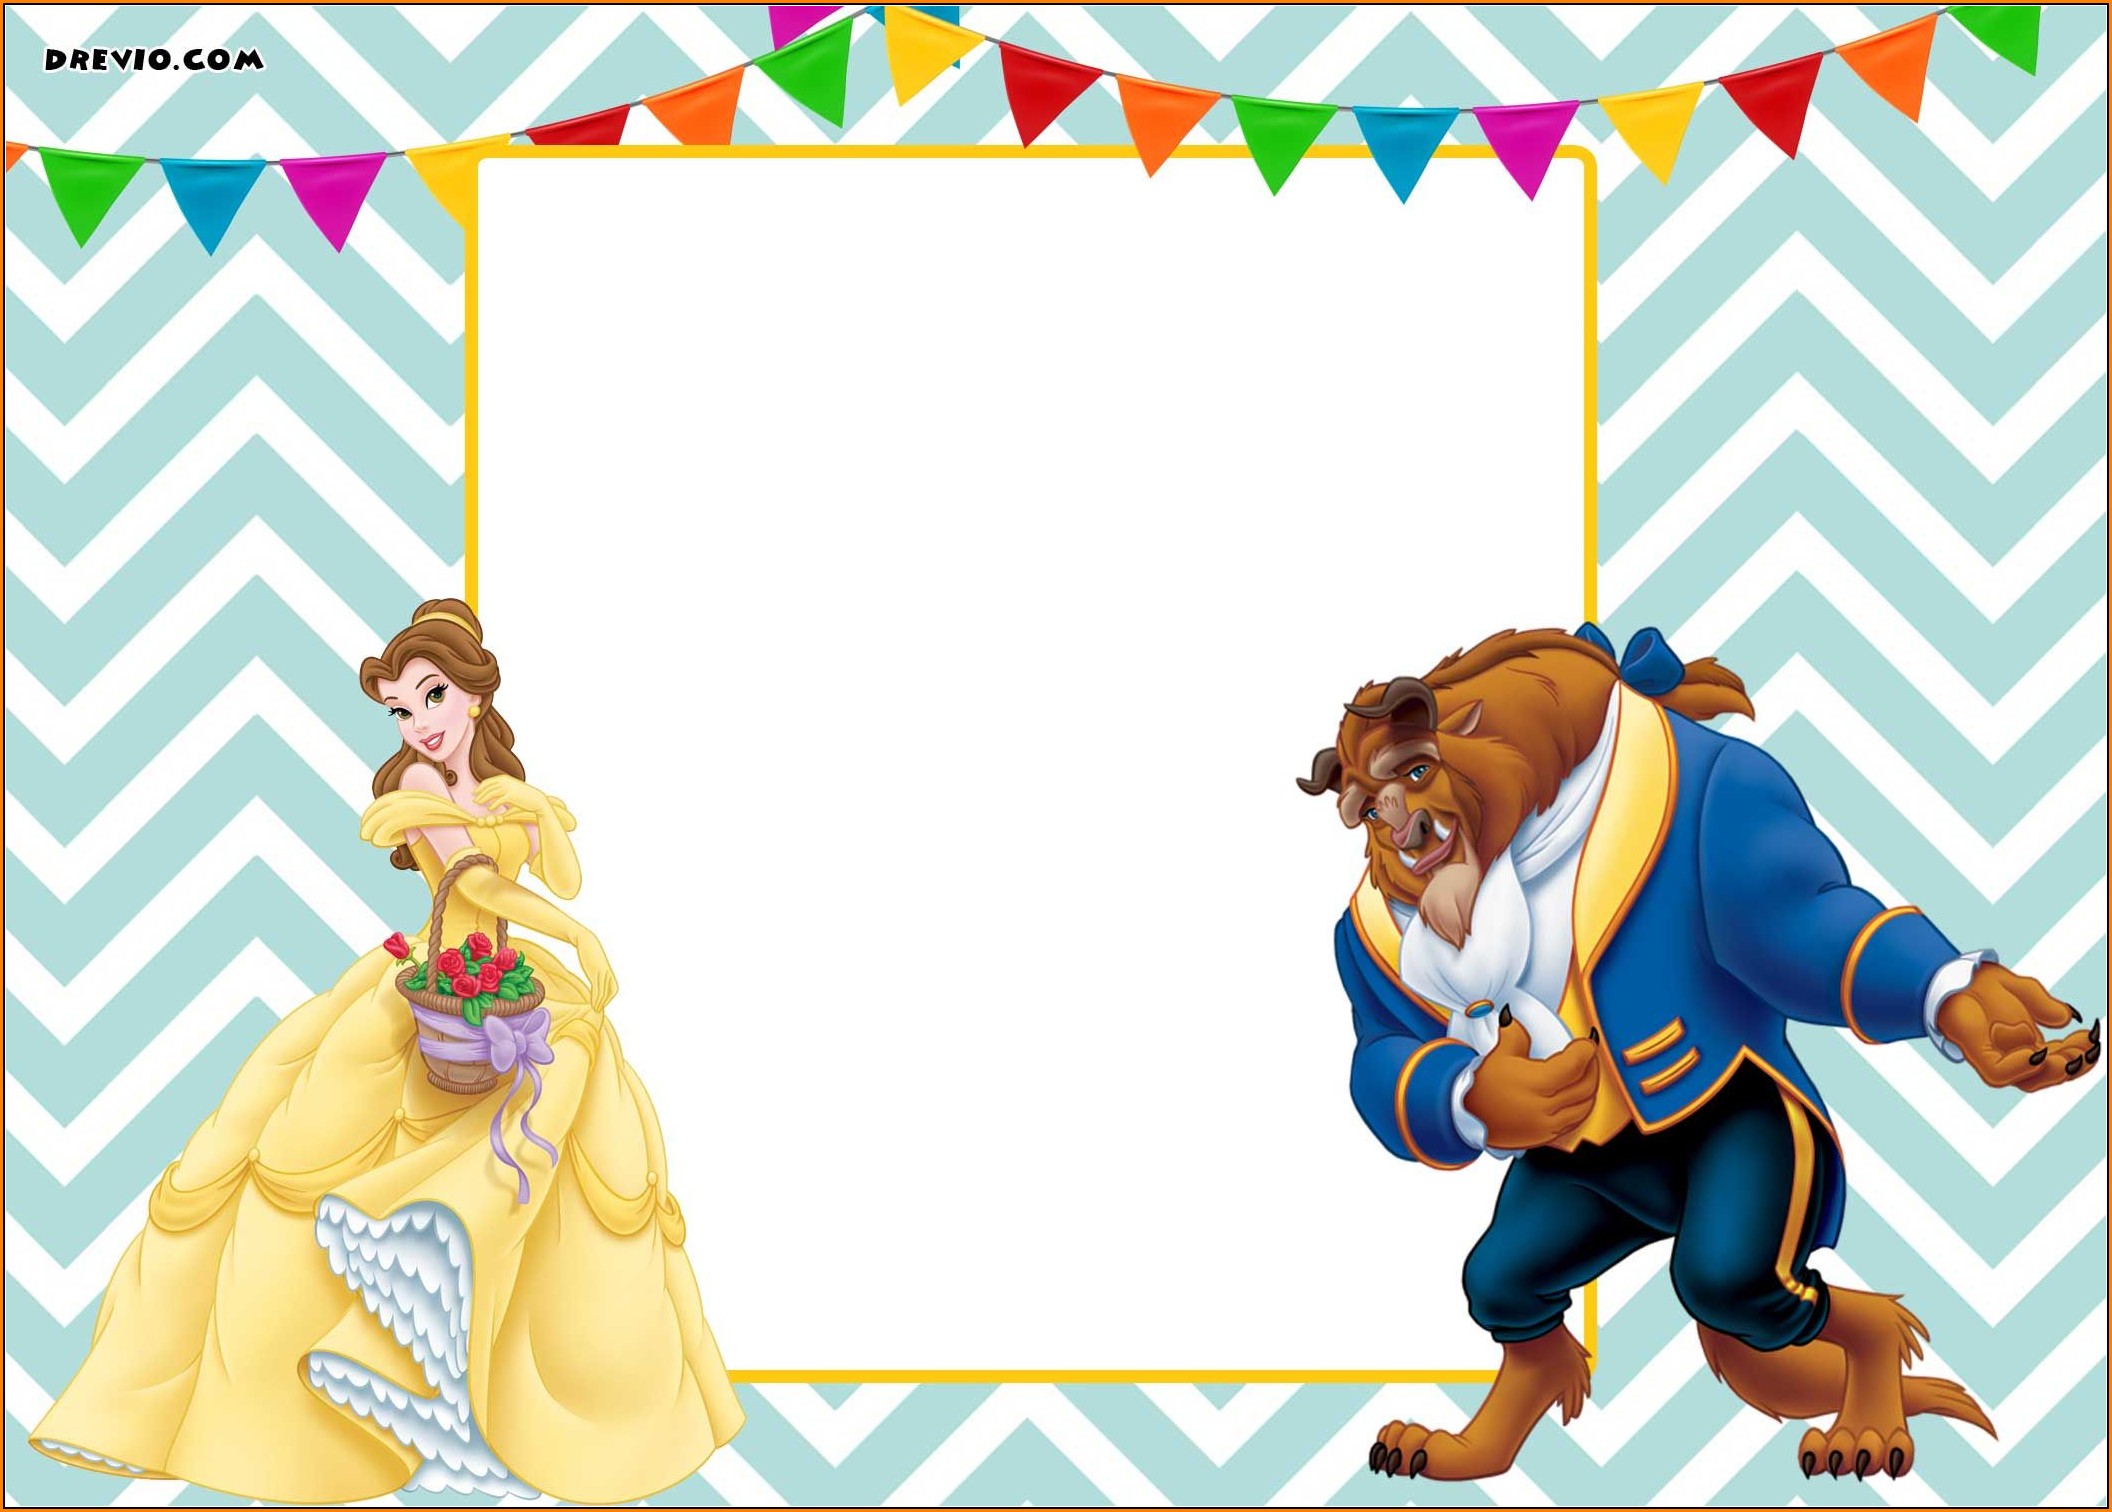 Beauty And The Beast Party Invitation Template Free